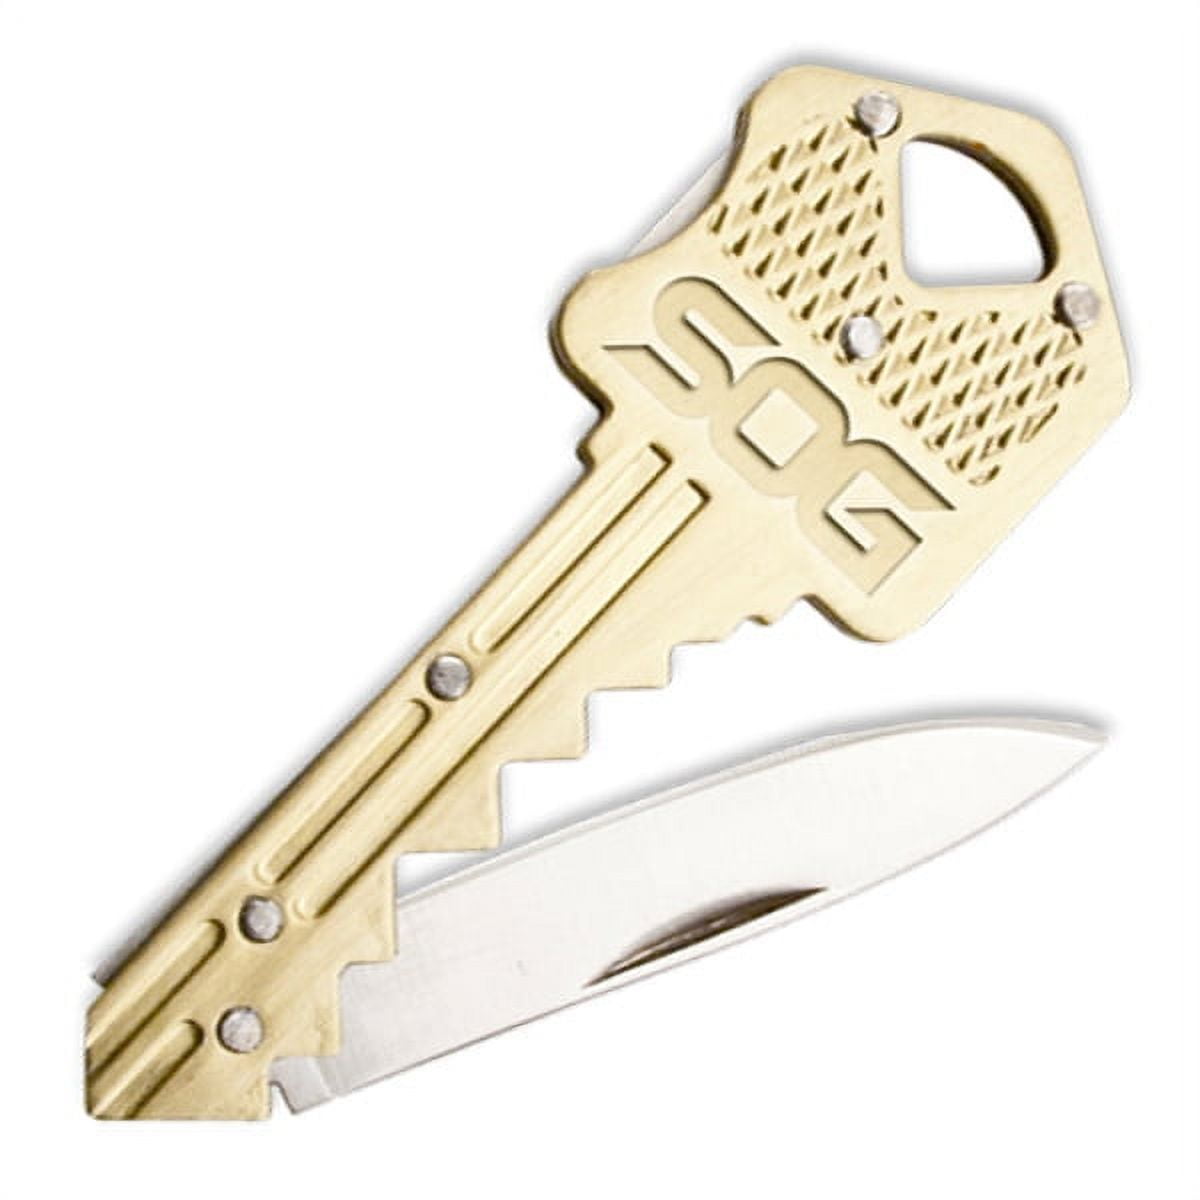 Colonial Brass Handle Tiny Key Ring Knife Made in USA 1-3/4 closed -  KnifeCenter - M12101 - Discontinued